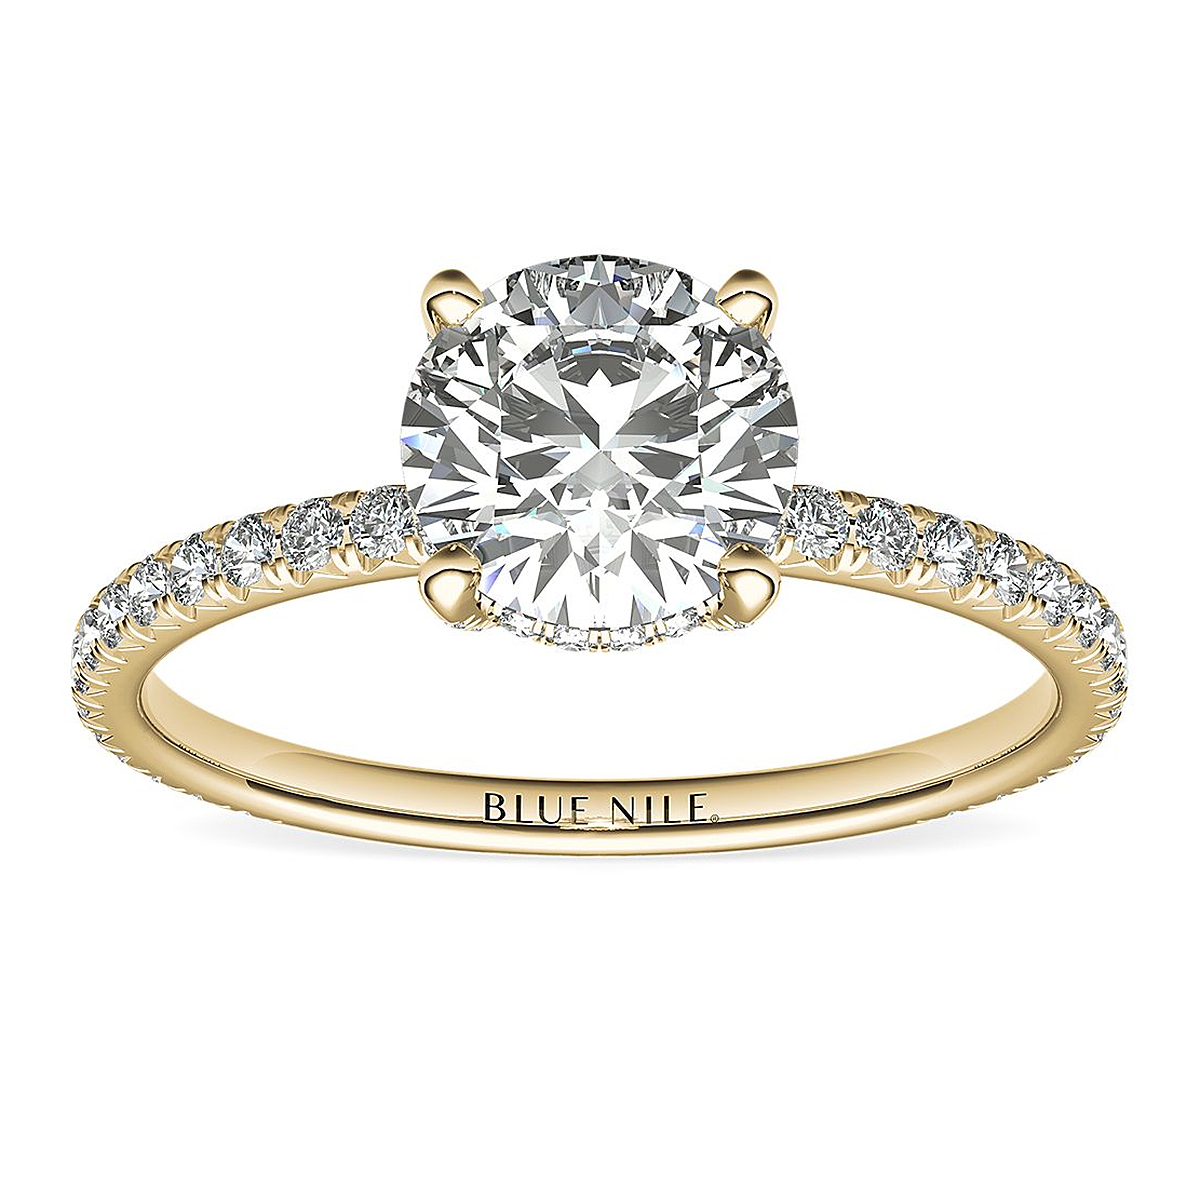 Asscher Cut Classic Halo Diamond Engagement Ring in 14k Yellow Gold